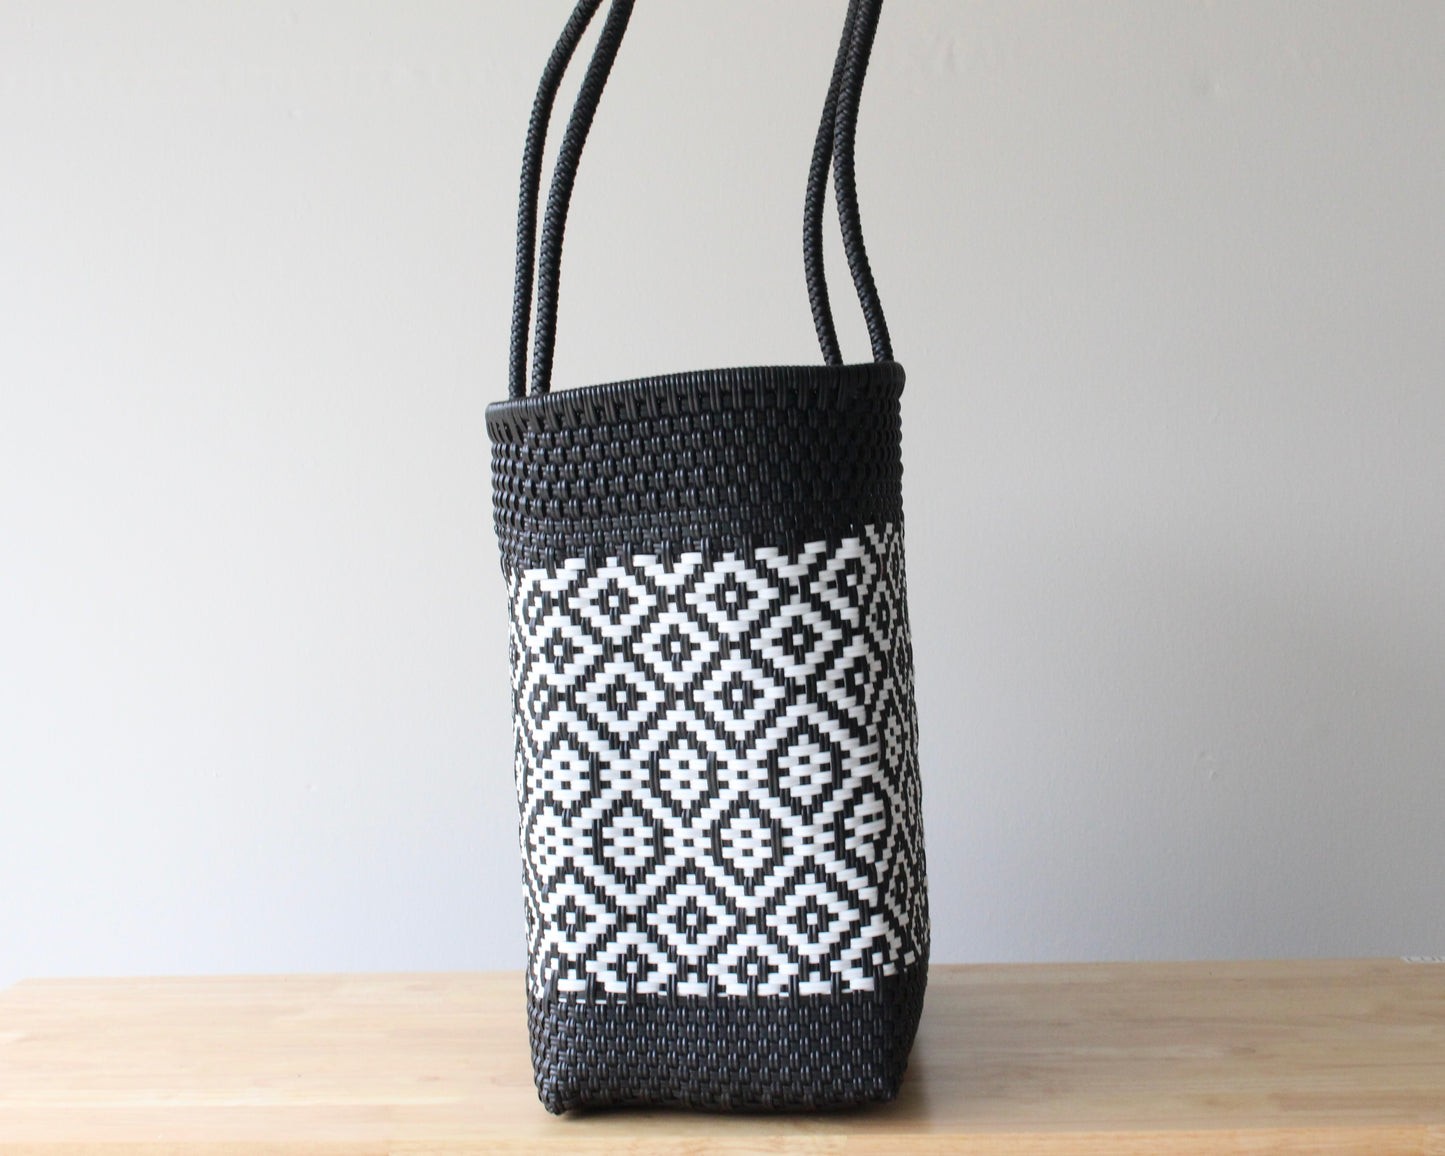 Black & White Mexican Tote Bag by MexiMexi